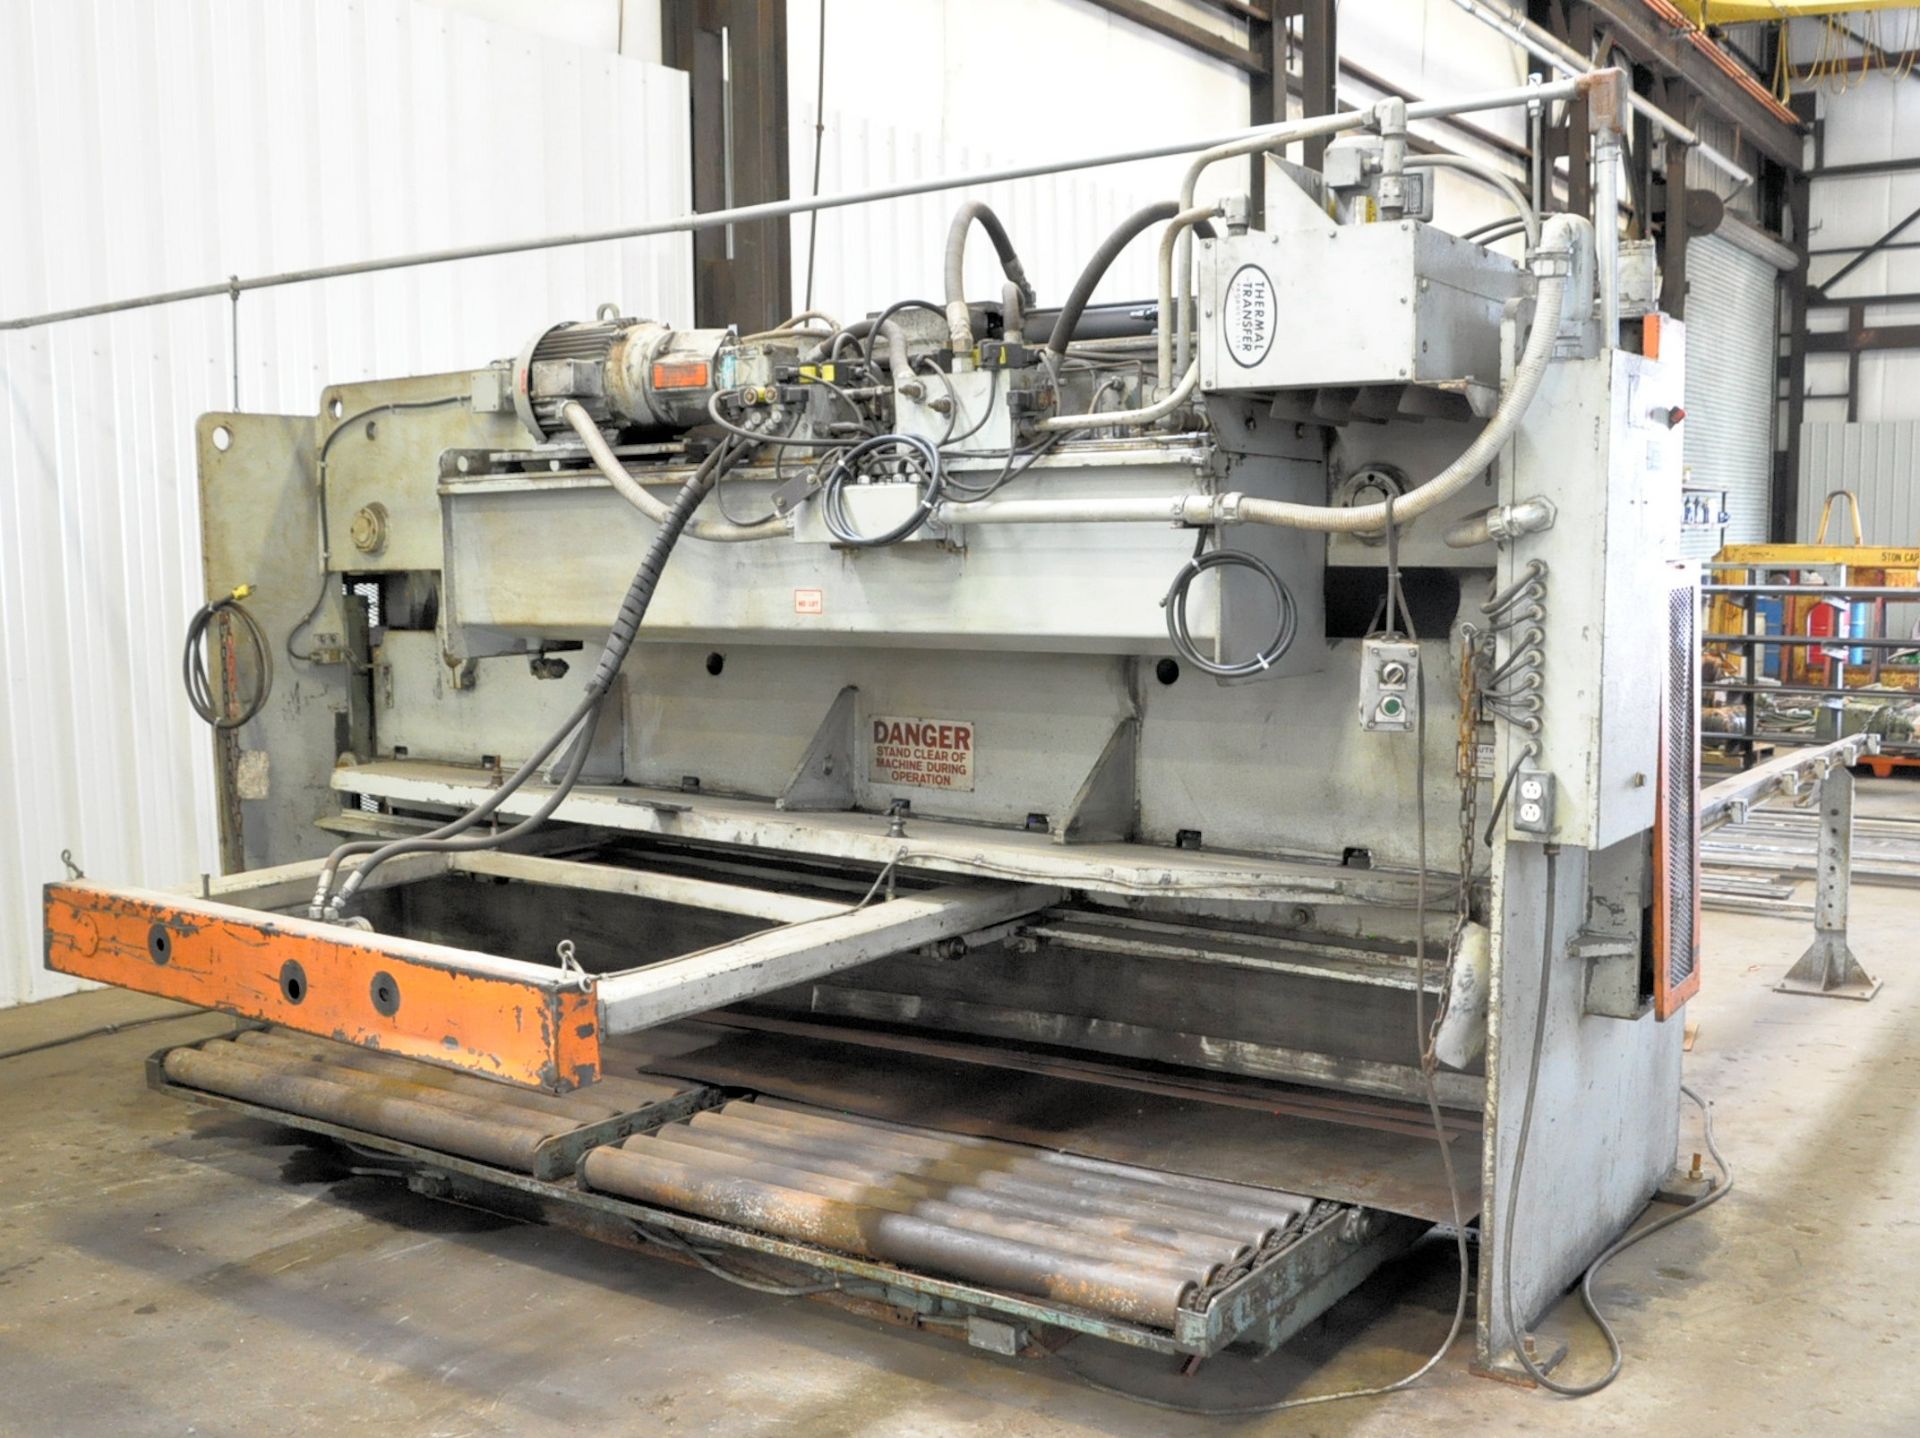 Pacific HTC Model 250-12PS, 144" x .250 Mild Steel Hydraulic Squaring Shear, s/n 3923040, Pacific HT - Image 6 of 7